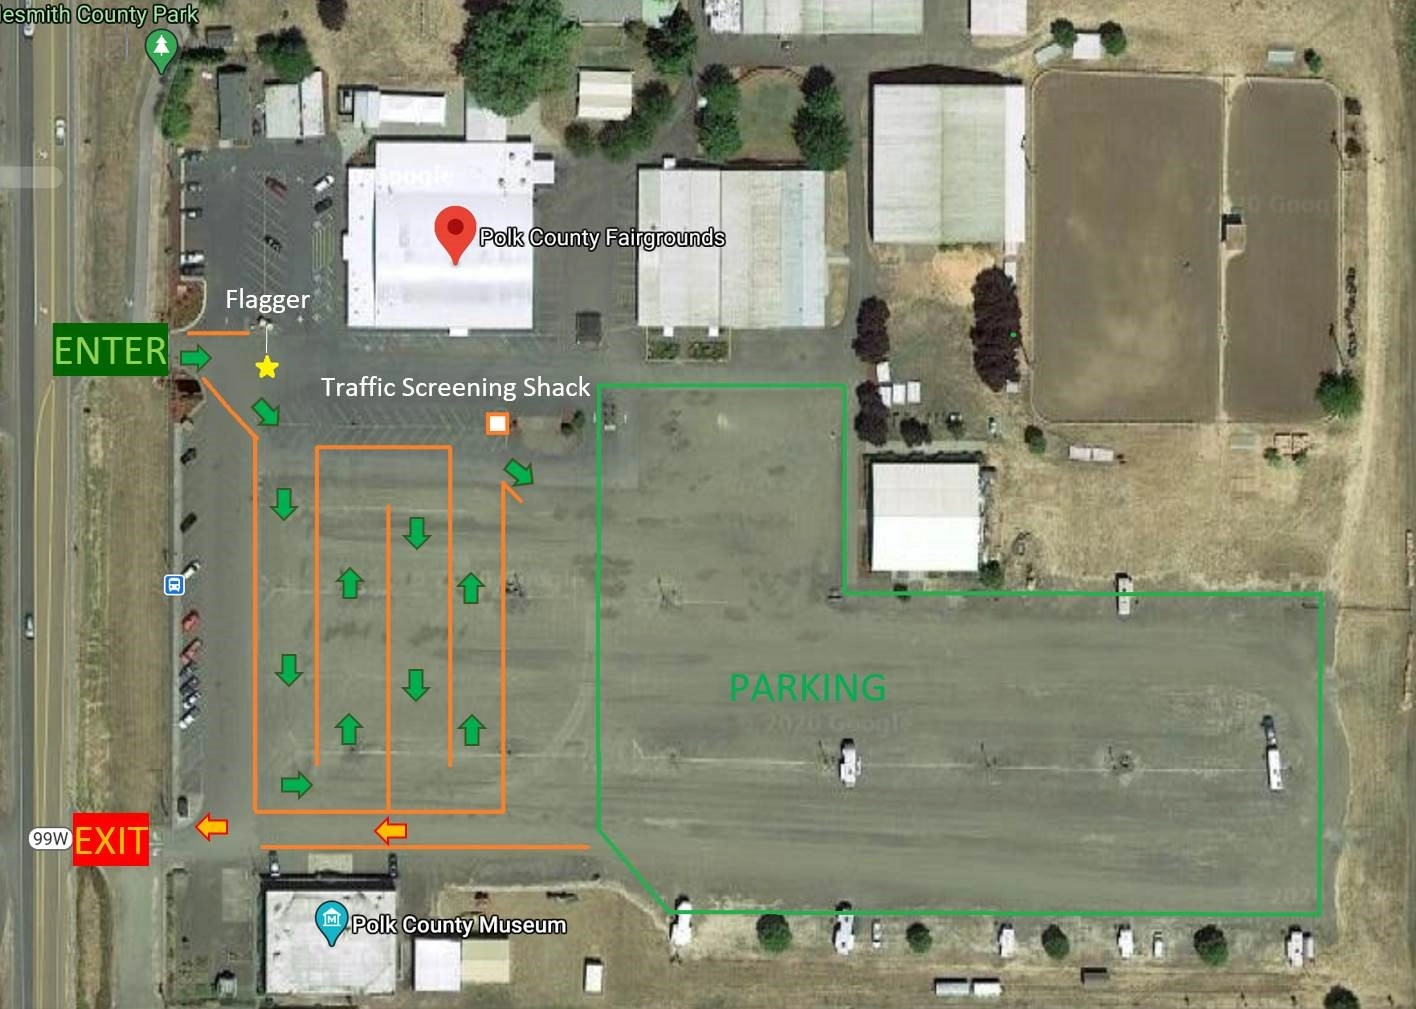 An aerial view of the Polk County Fairgrounds, show entrances and exits for the vaccine clinic.